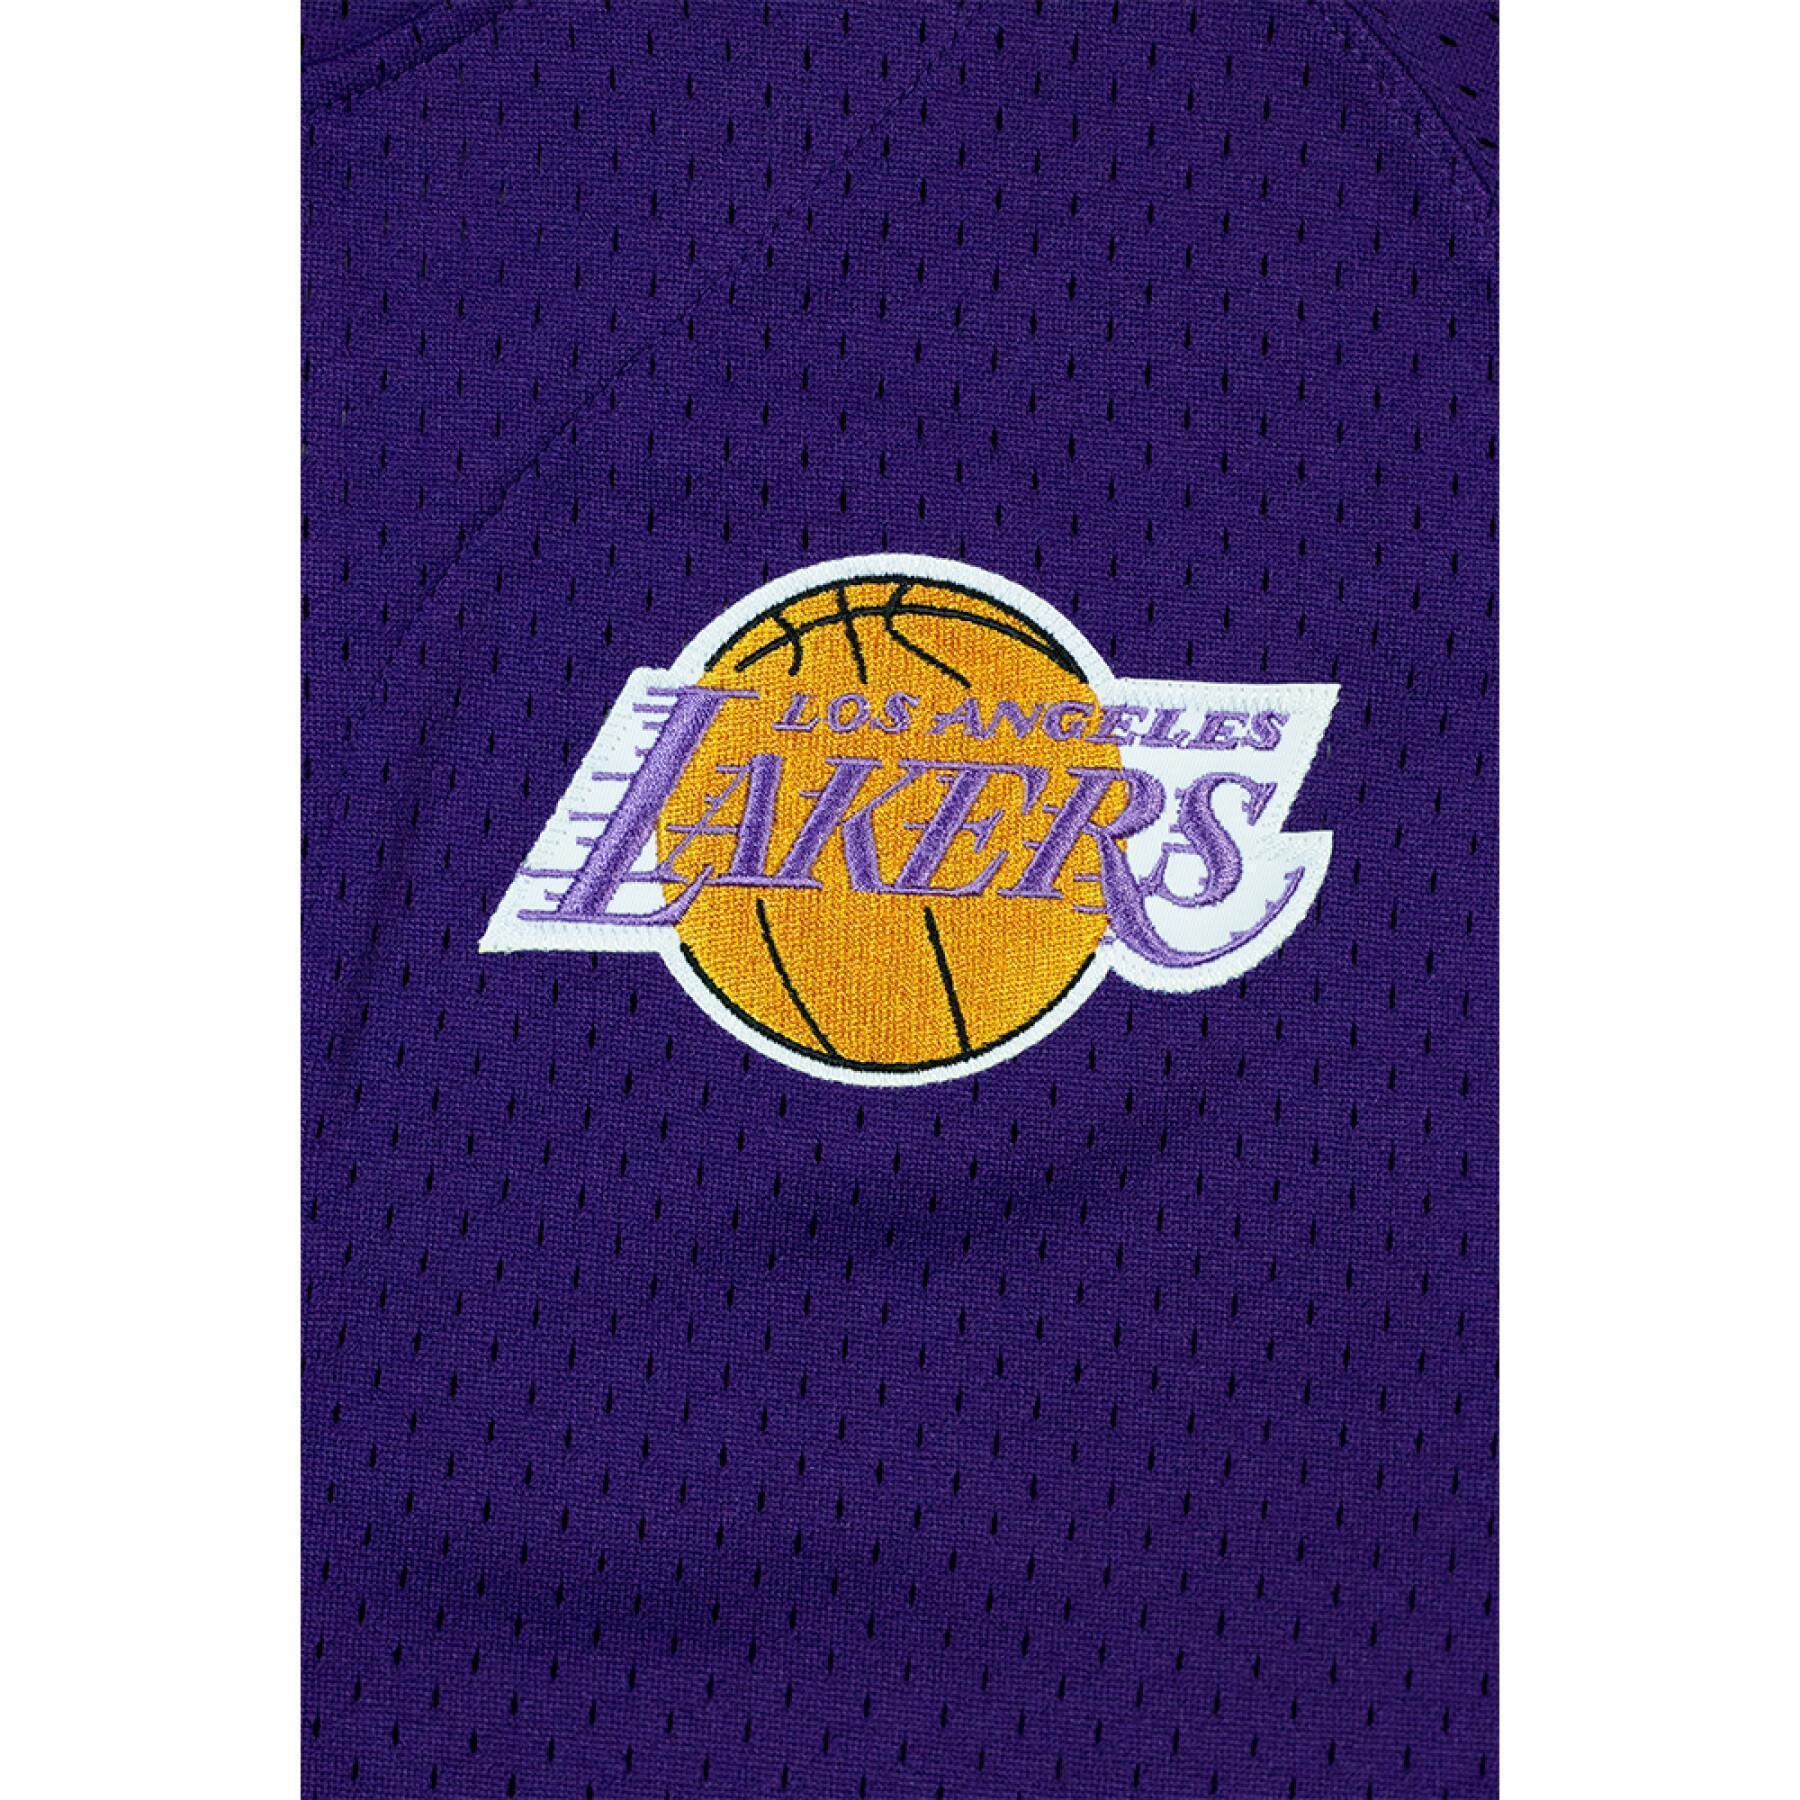 Camicia Los Angeles Lakers